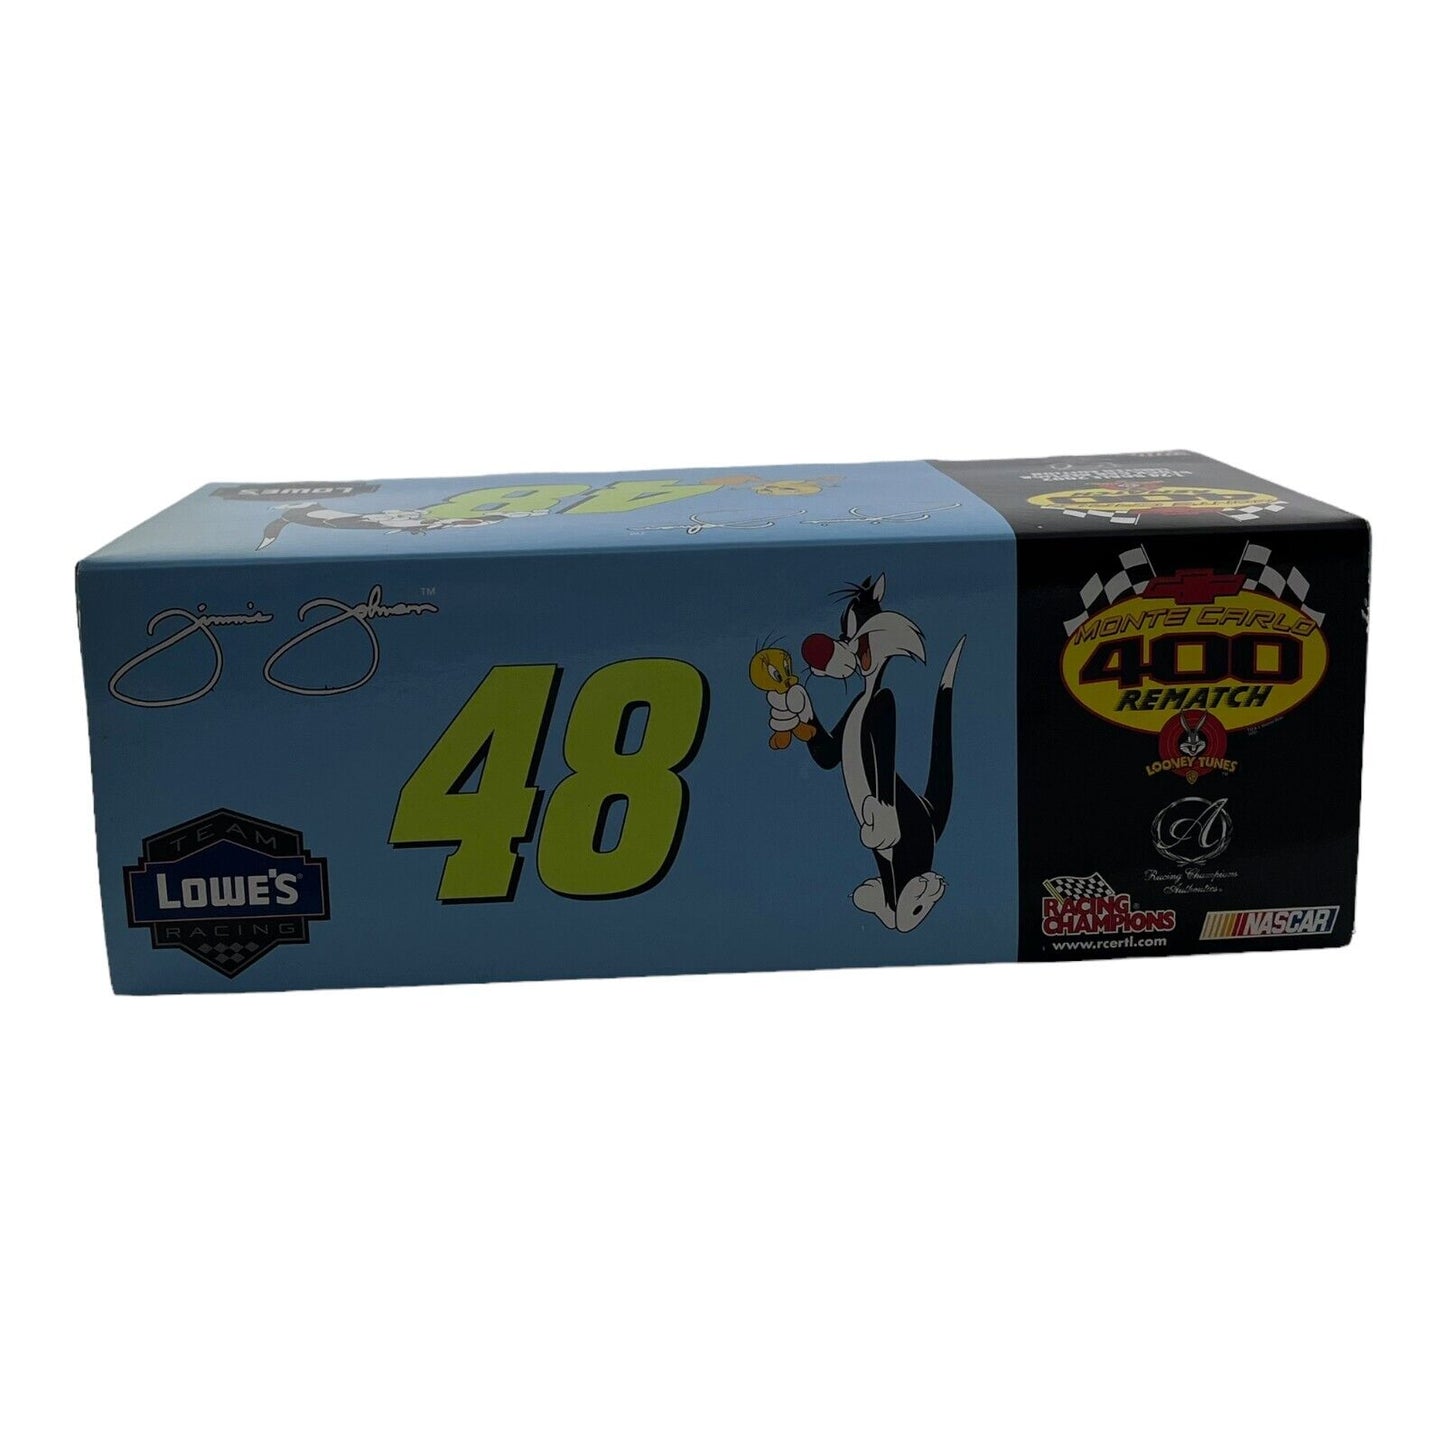 1:24 Scale Jimmie Johnson #48 Looney Tunes Diecast Car 2002 Racing Champions